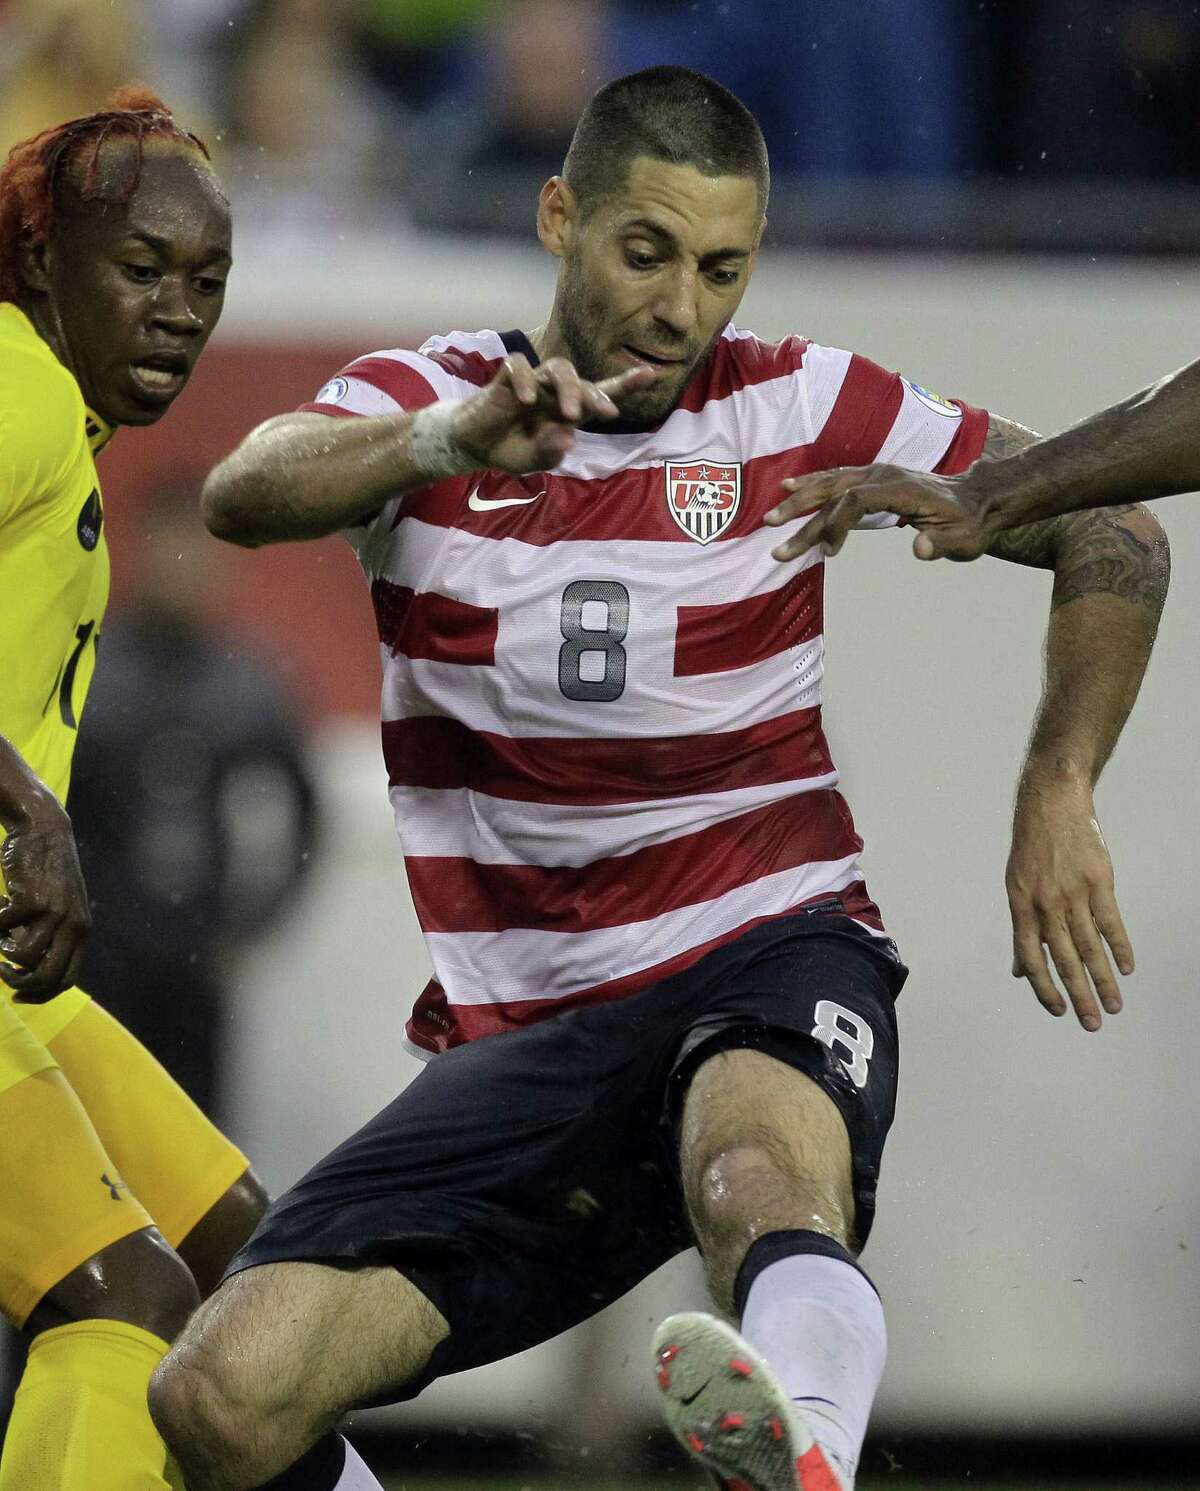 1) Clint Dempsey was named captain for the 2014 FIFA World Cup, he was born on March 9, 1983 in Nacogdoches, Texas.